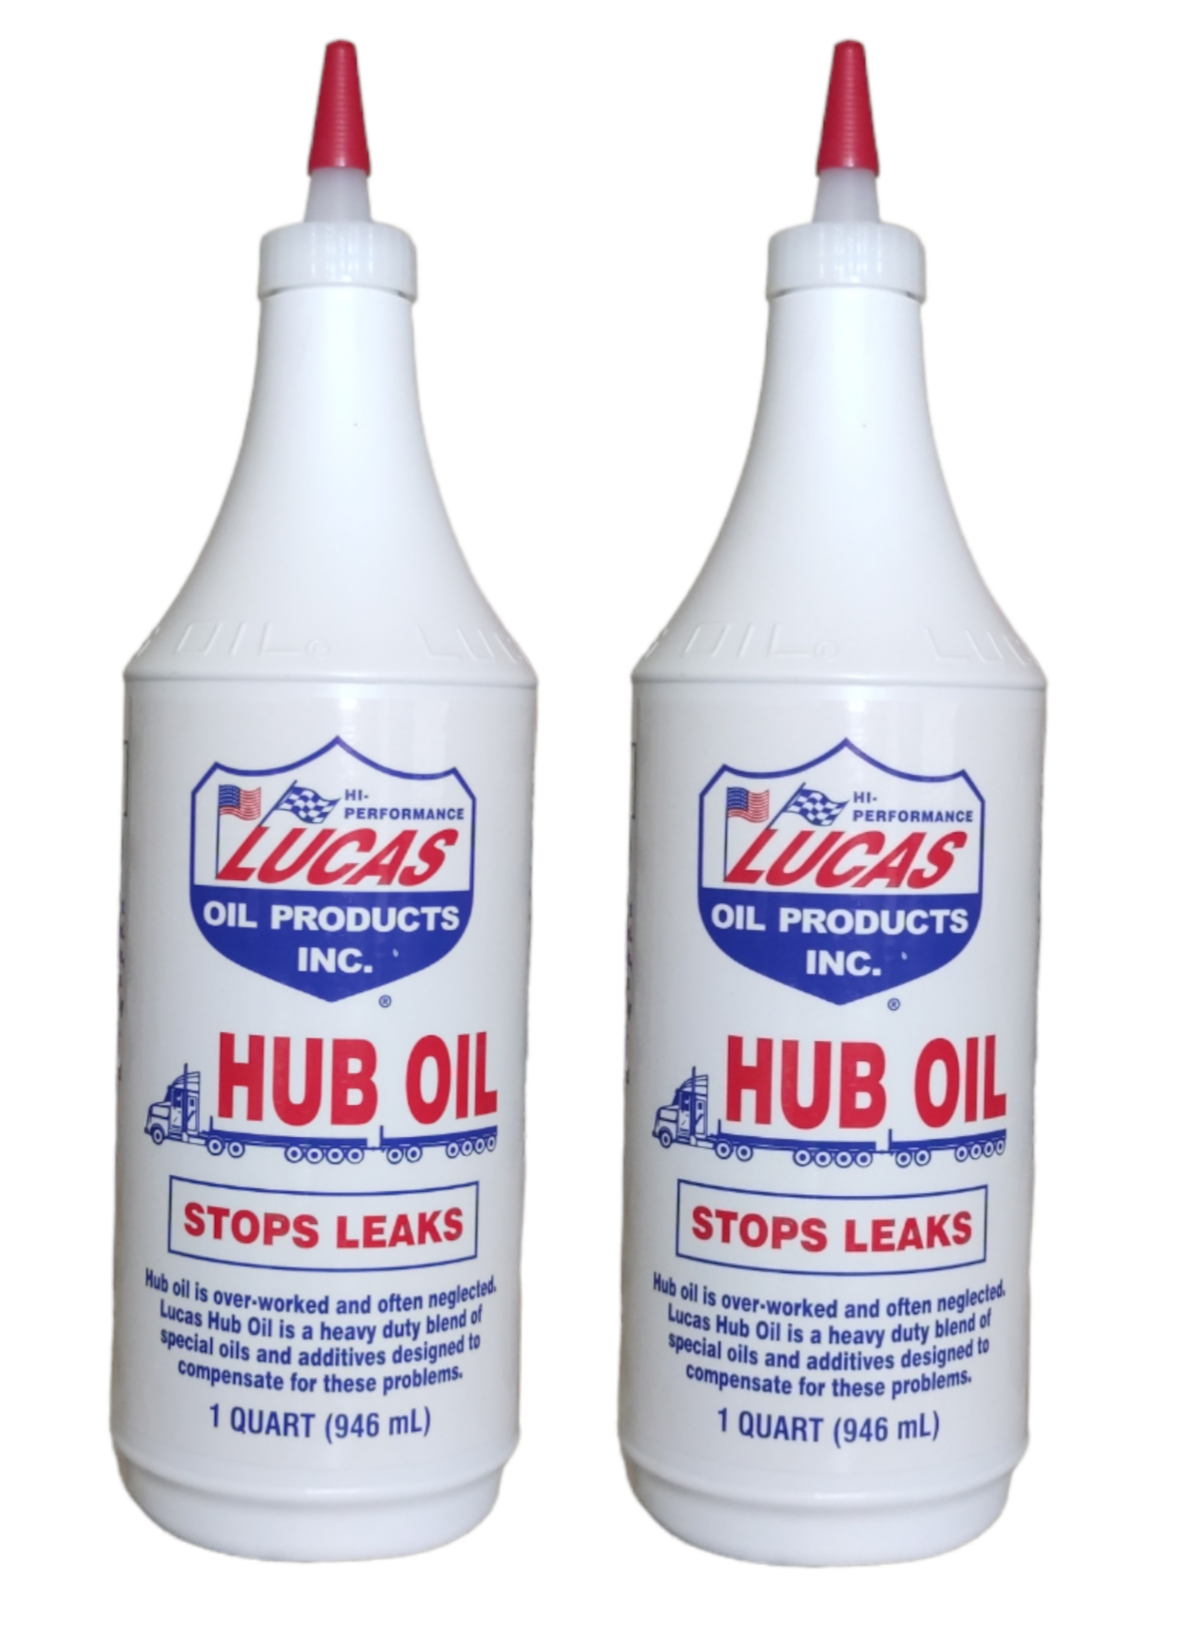 Lucas Oil Products HUB OIL (2pack)